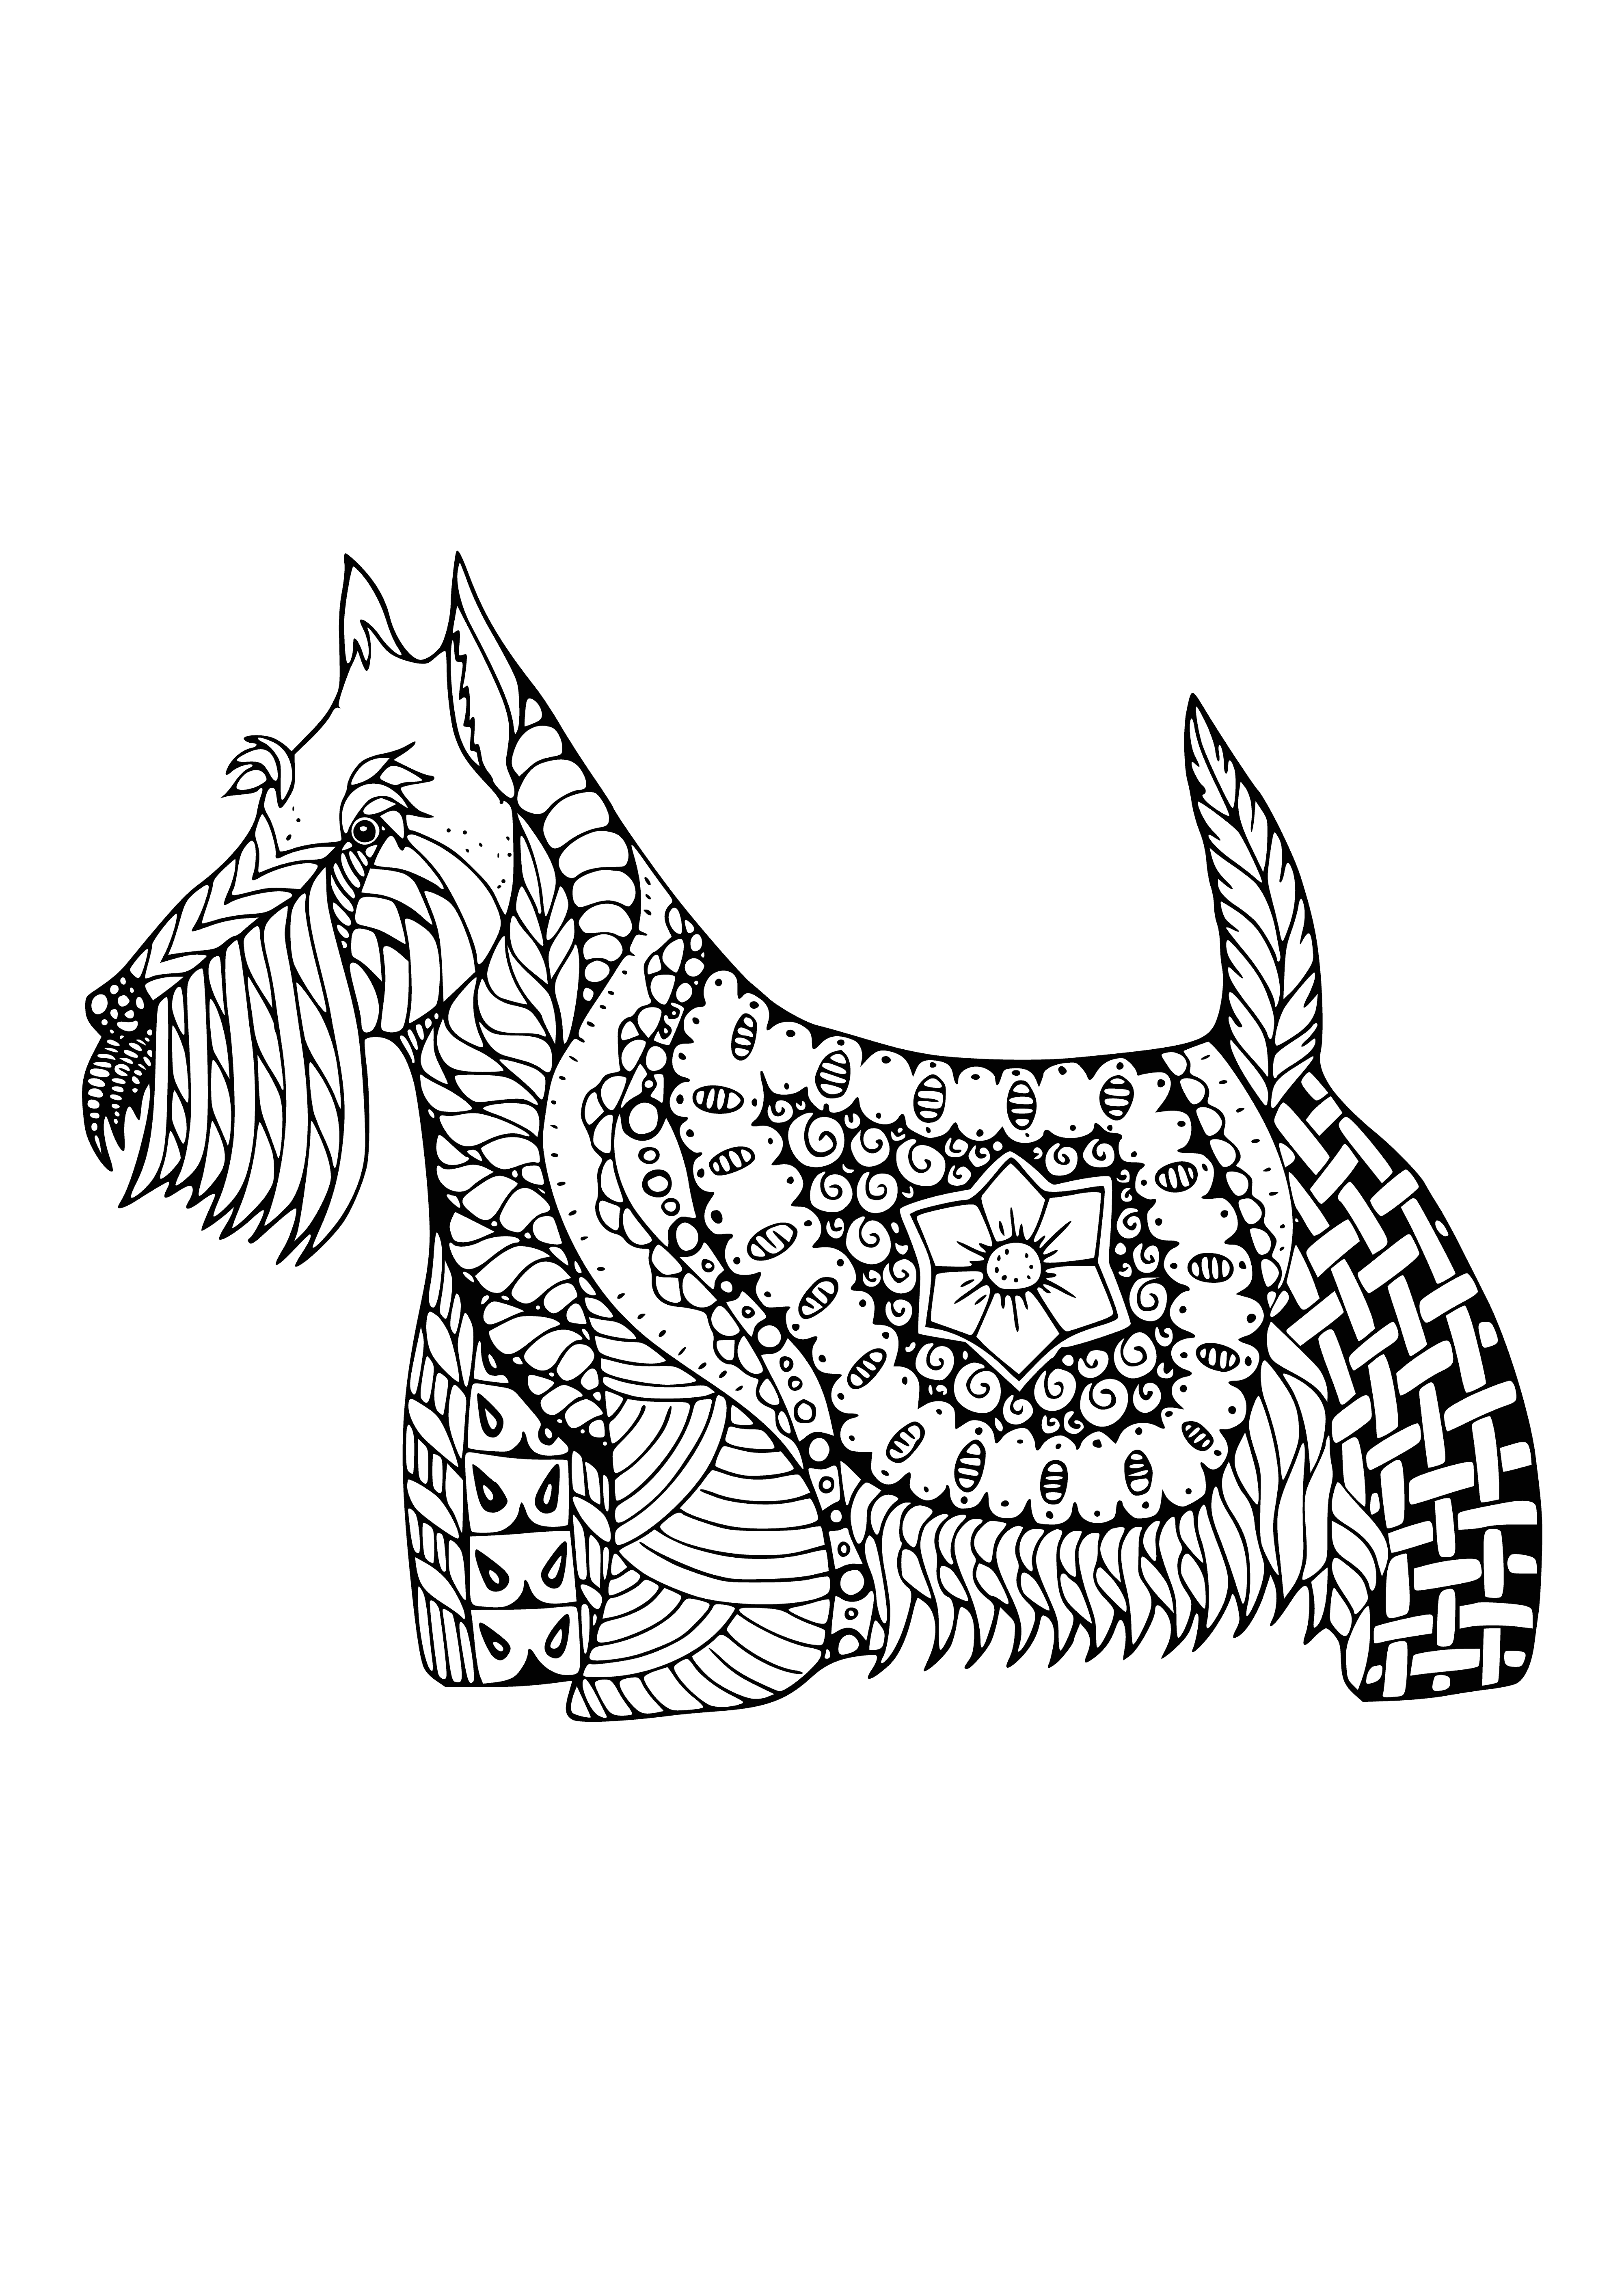 Scotch terrier coloring page